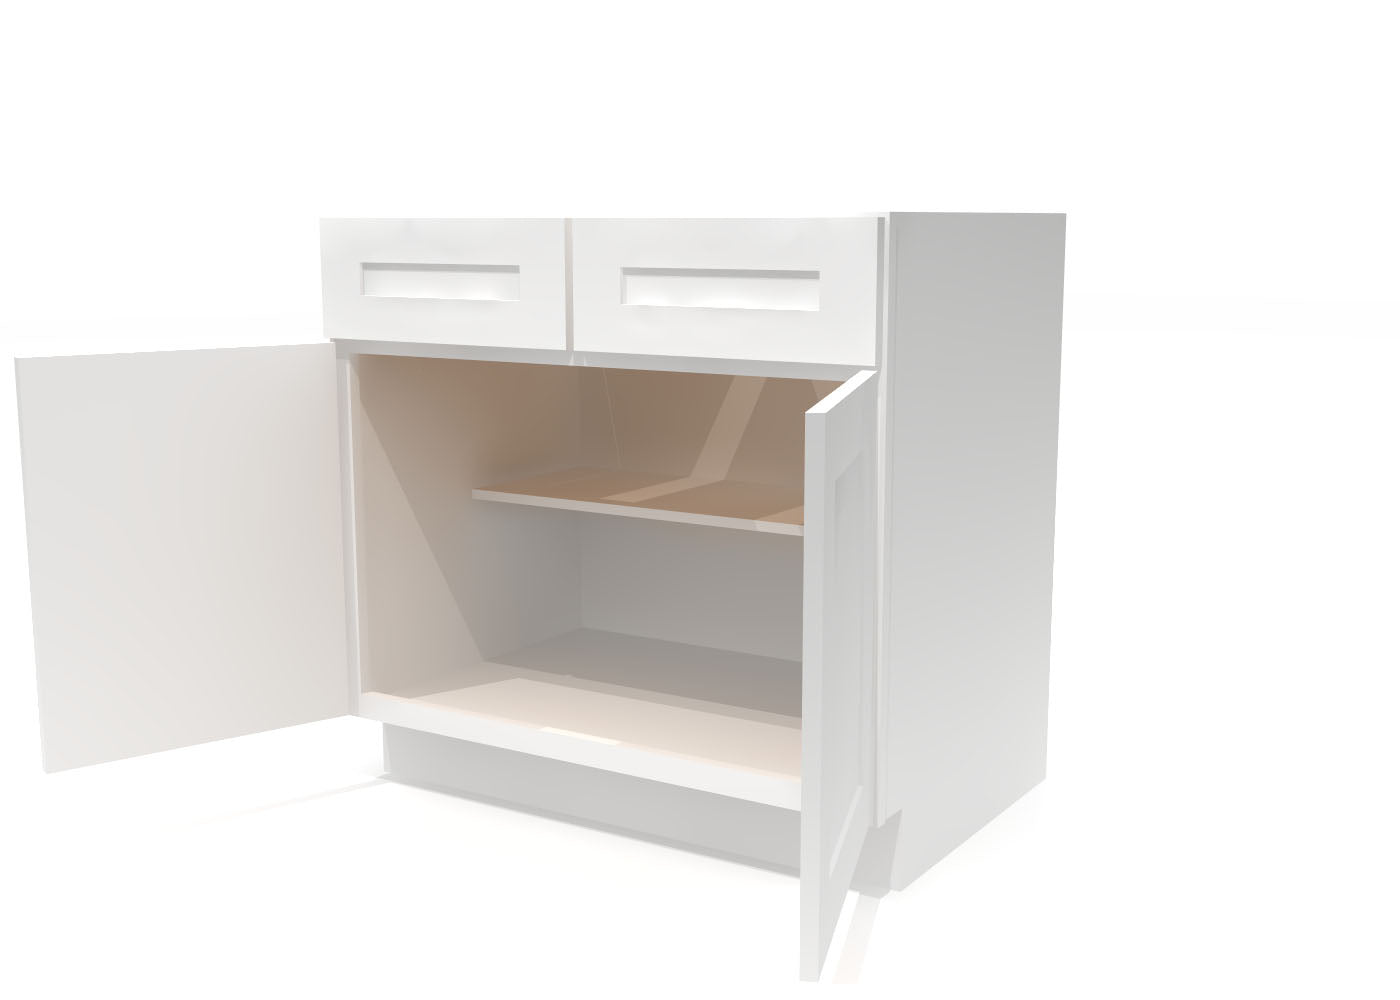 Base Double Door Two Drawers 36" Wide White Shaker Cabinet